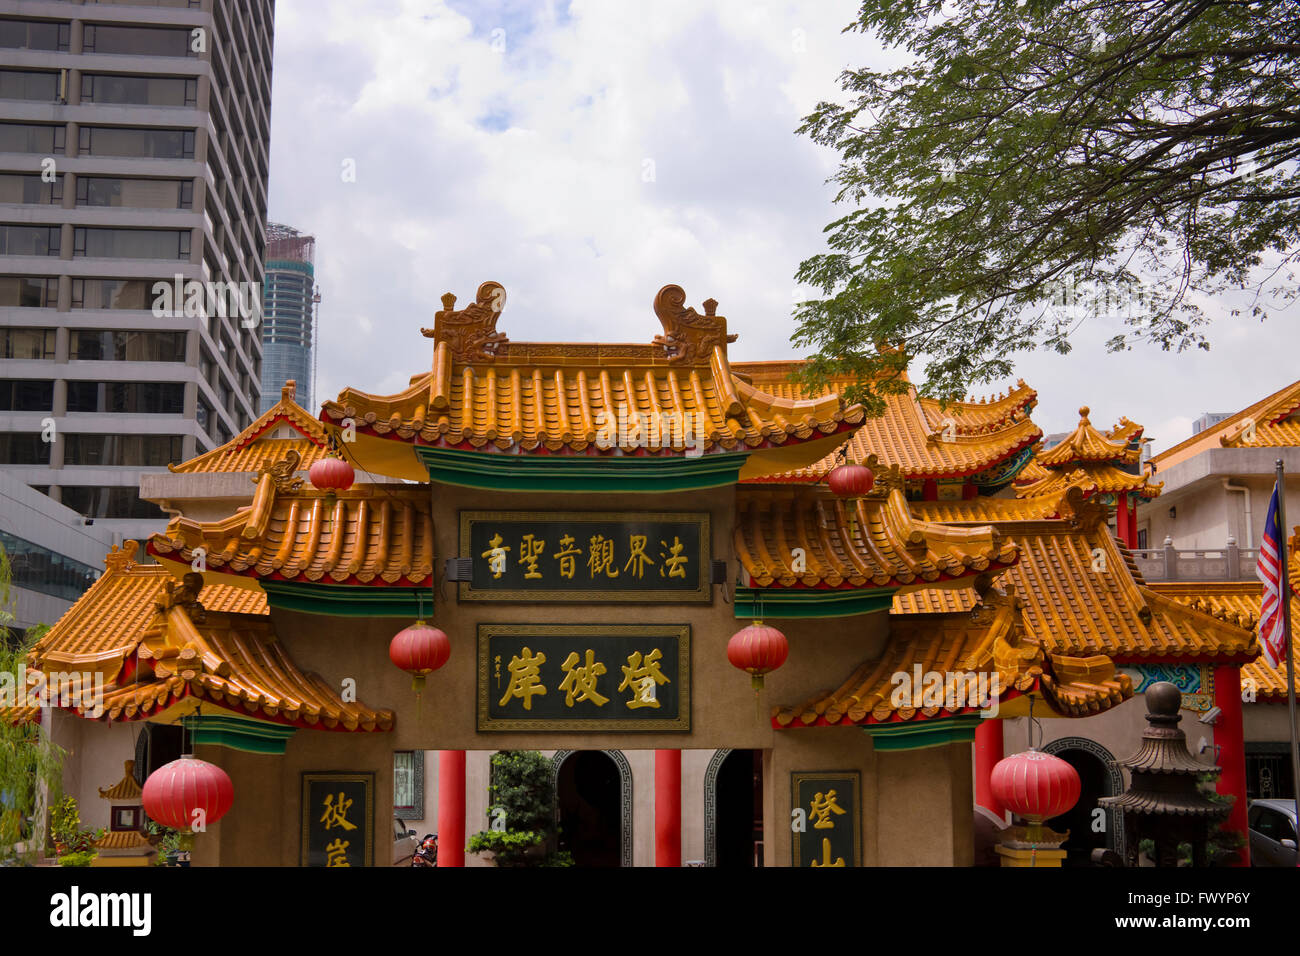 Temple chinois, Kuala Lumpur, Malaisie Banque D'Images